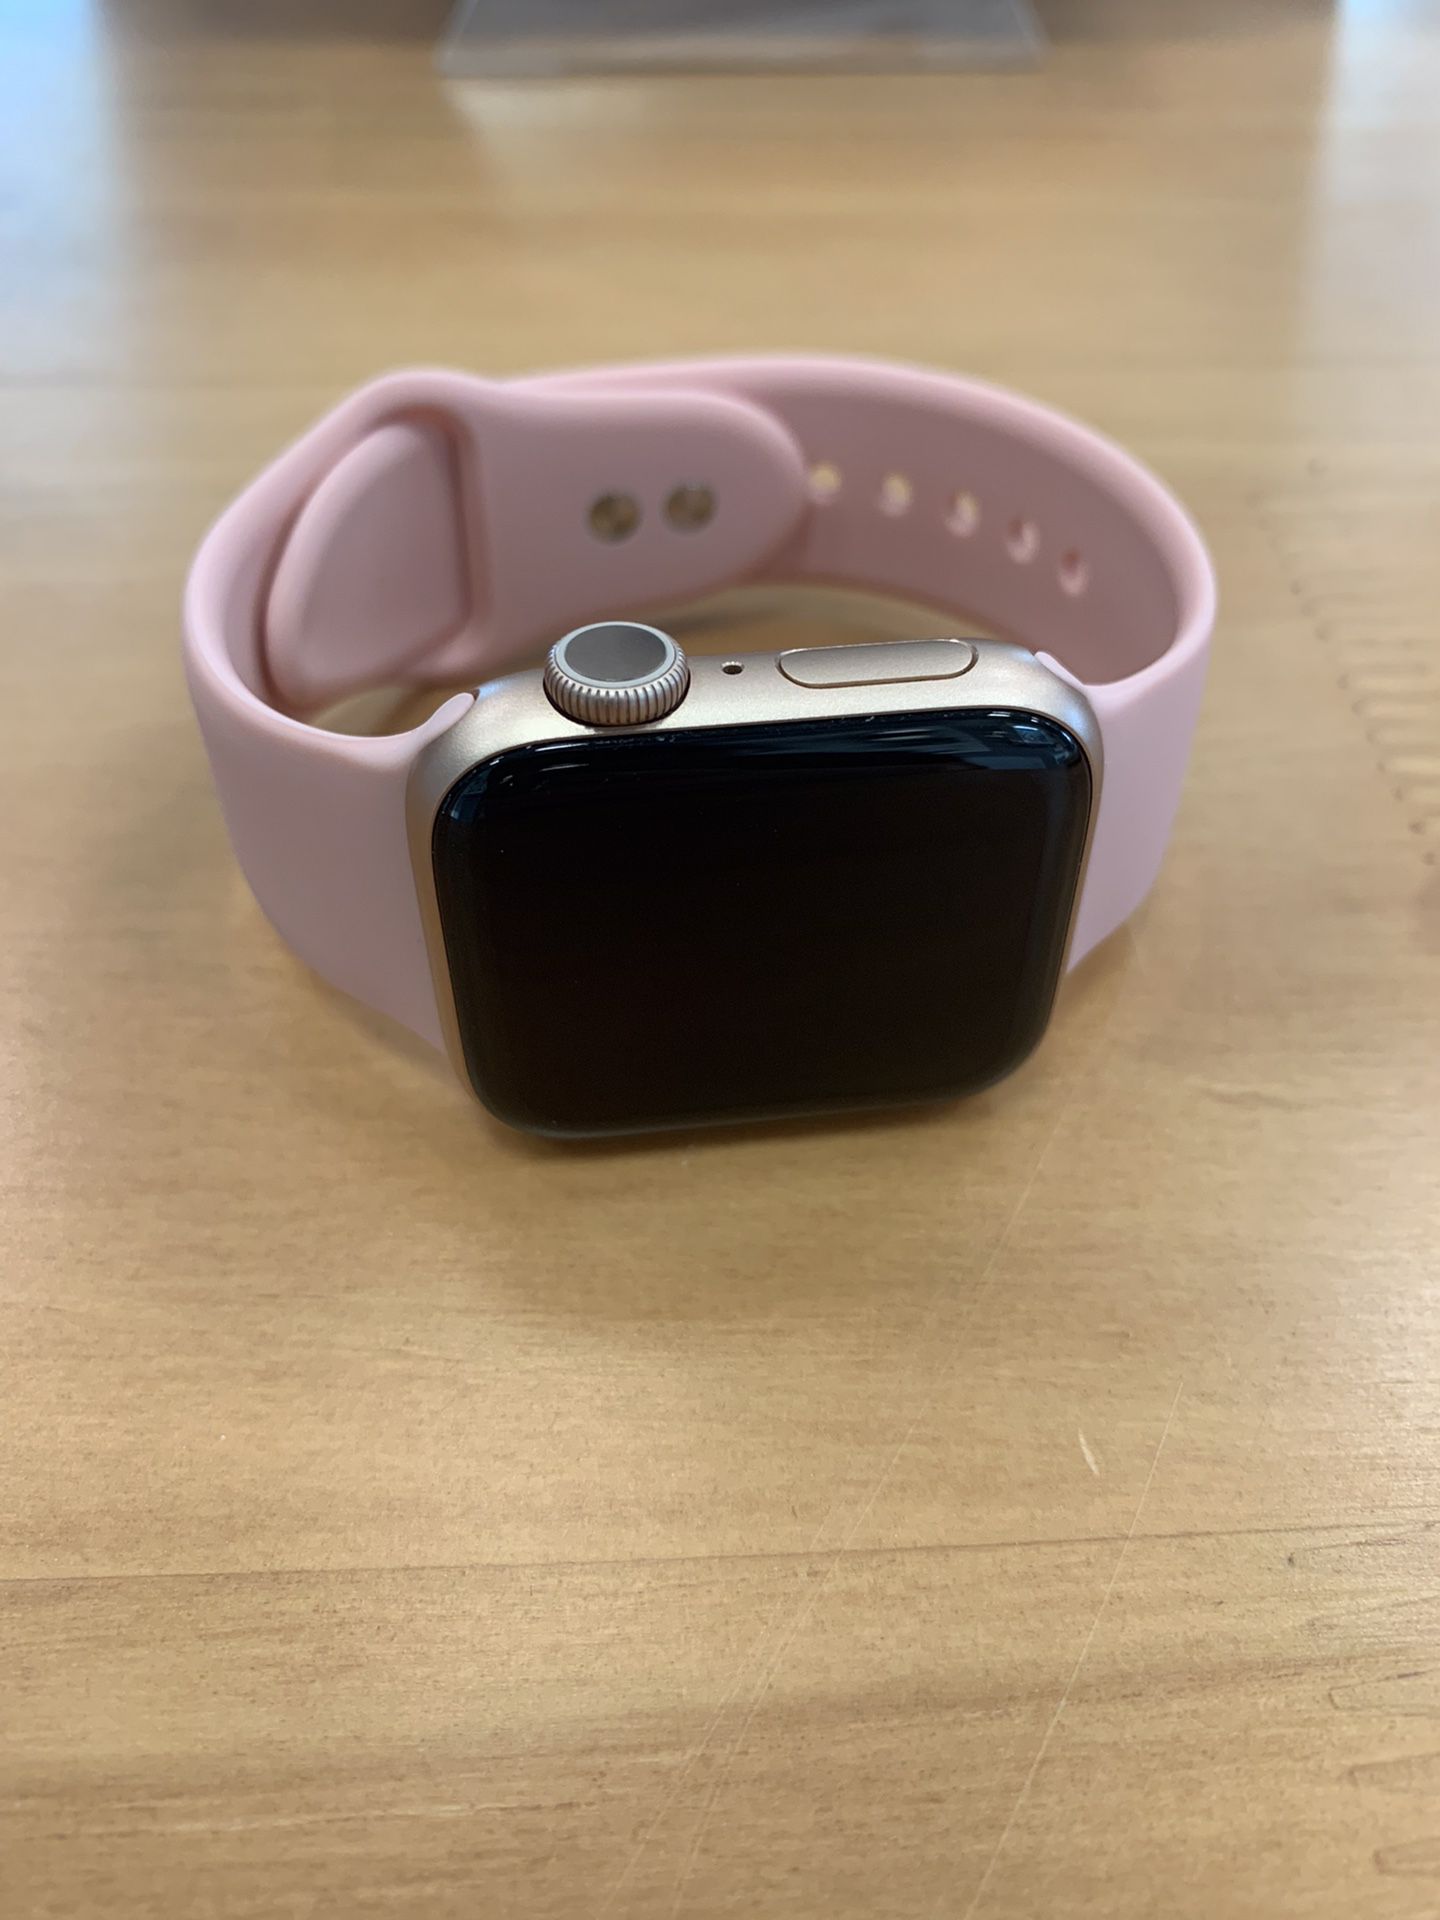 Apple Watch Series 5 (will take payments ->)